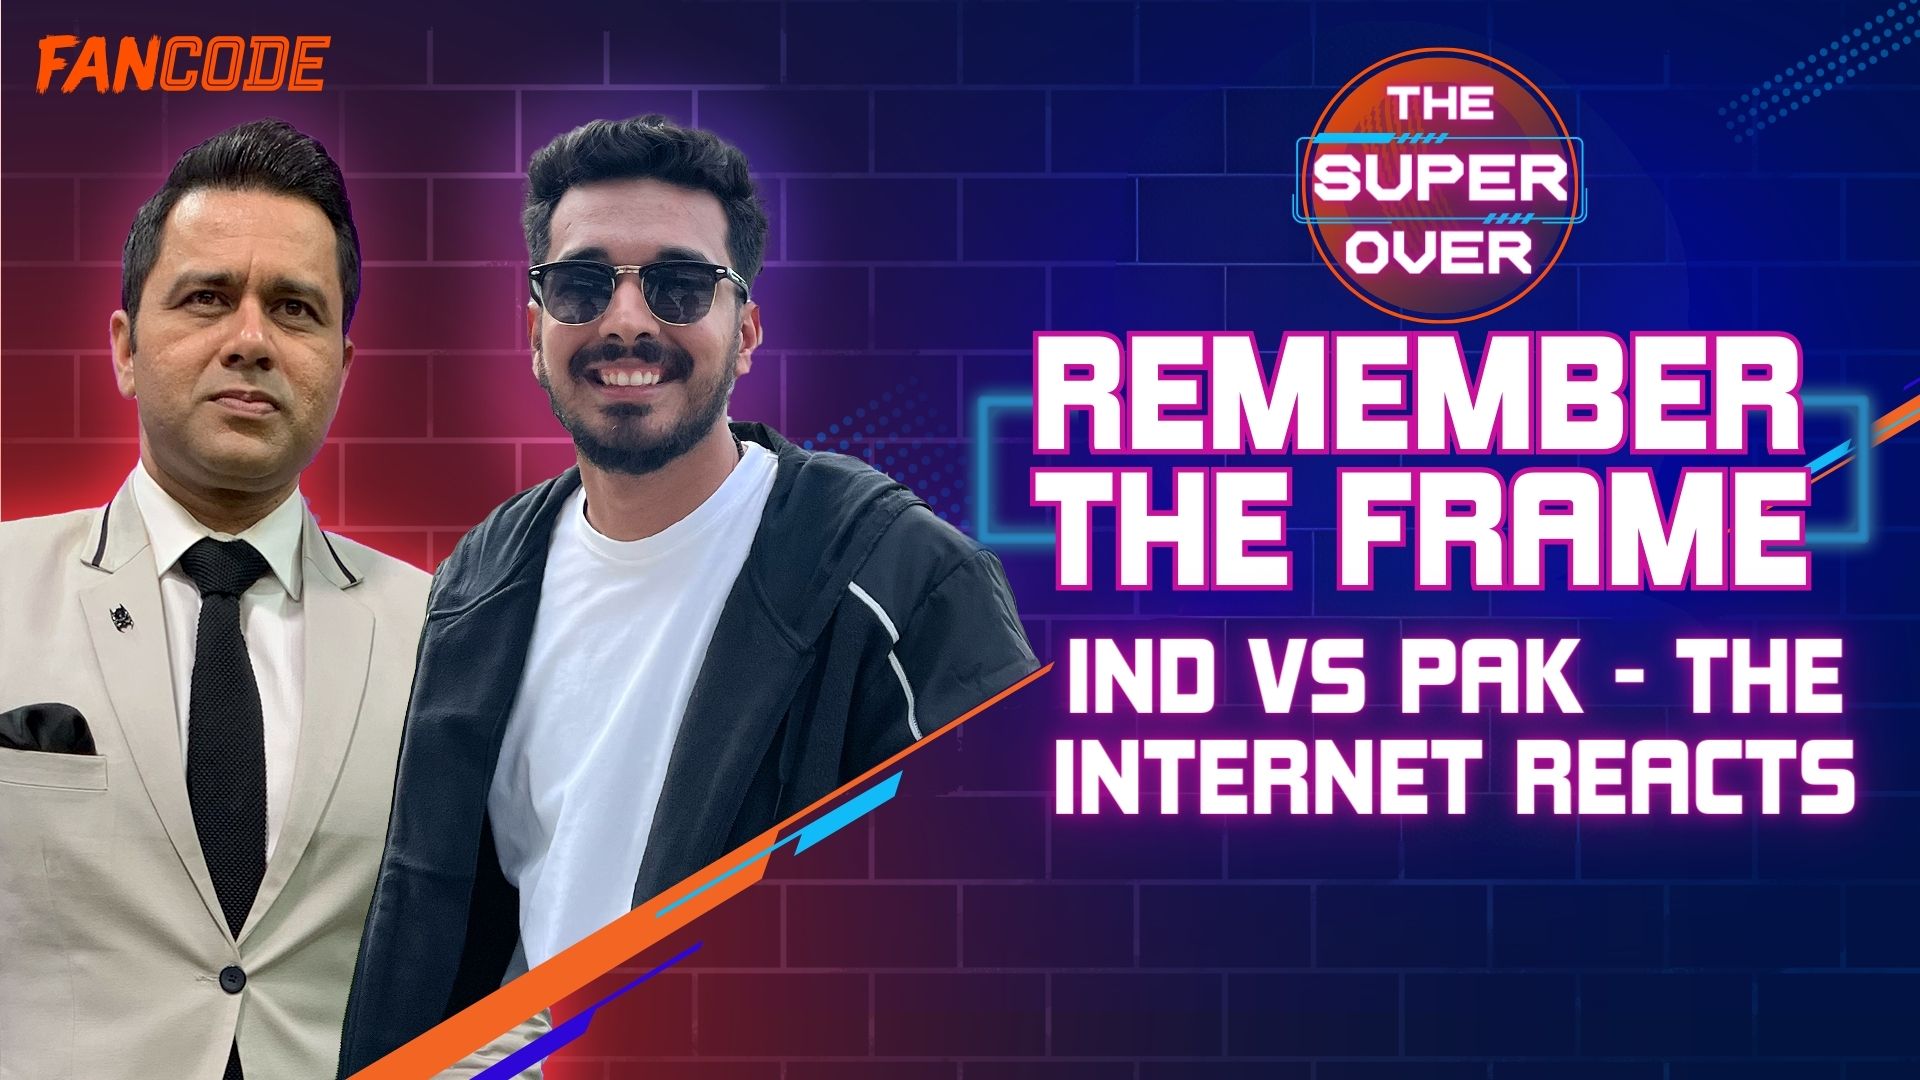 Remember the frame: IND vs PAK - The internet reacts